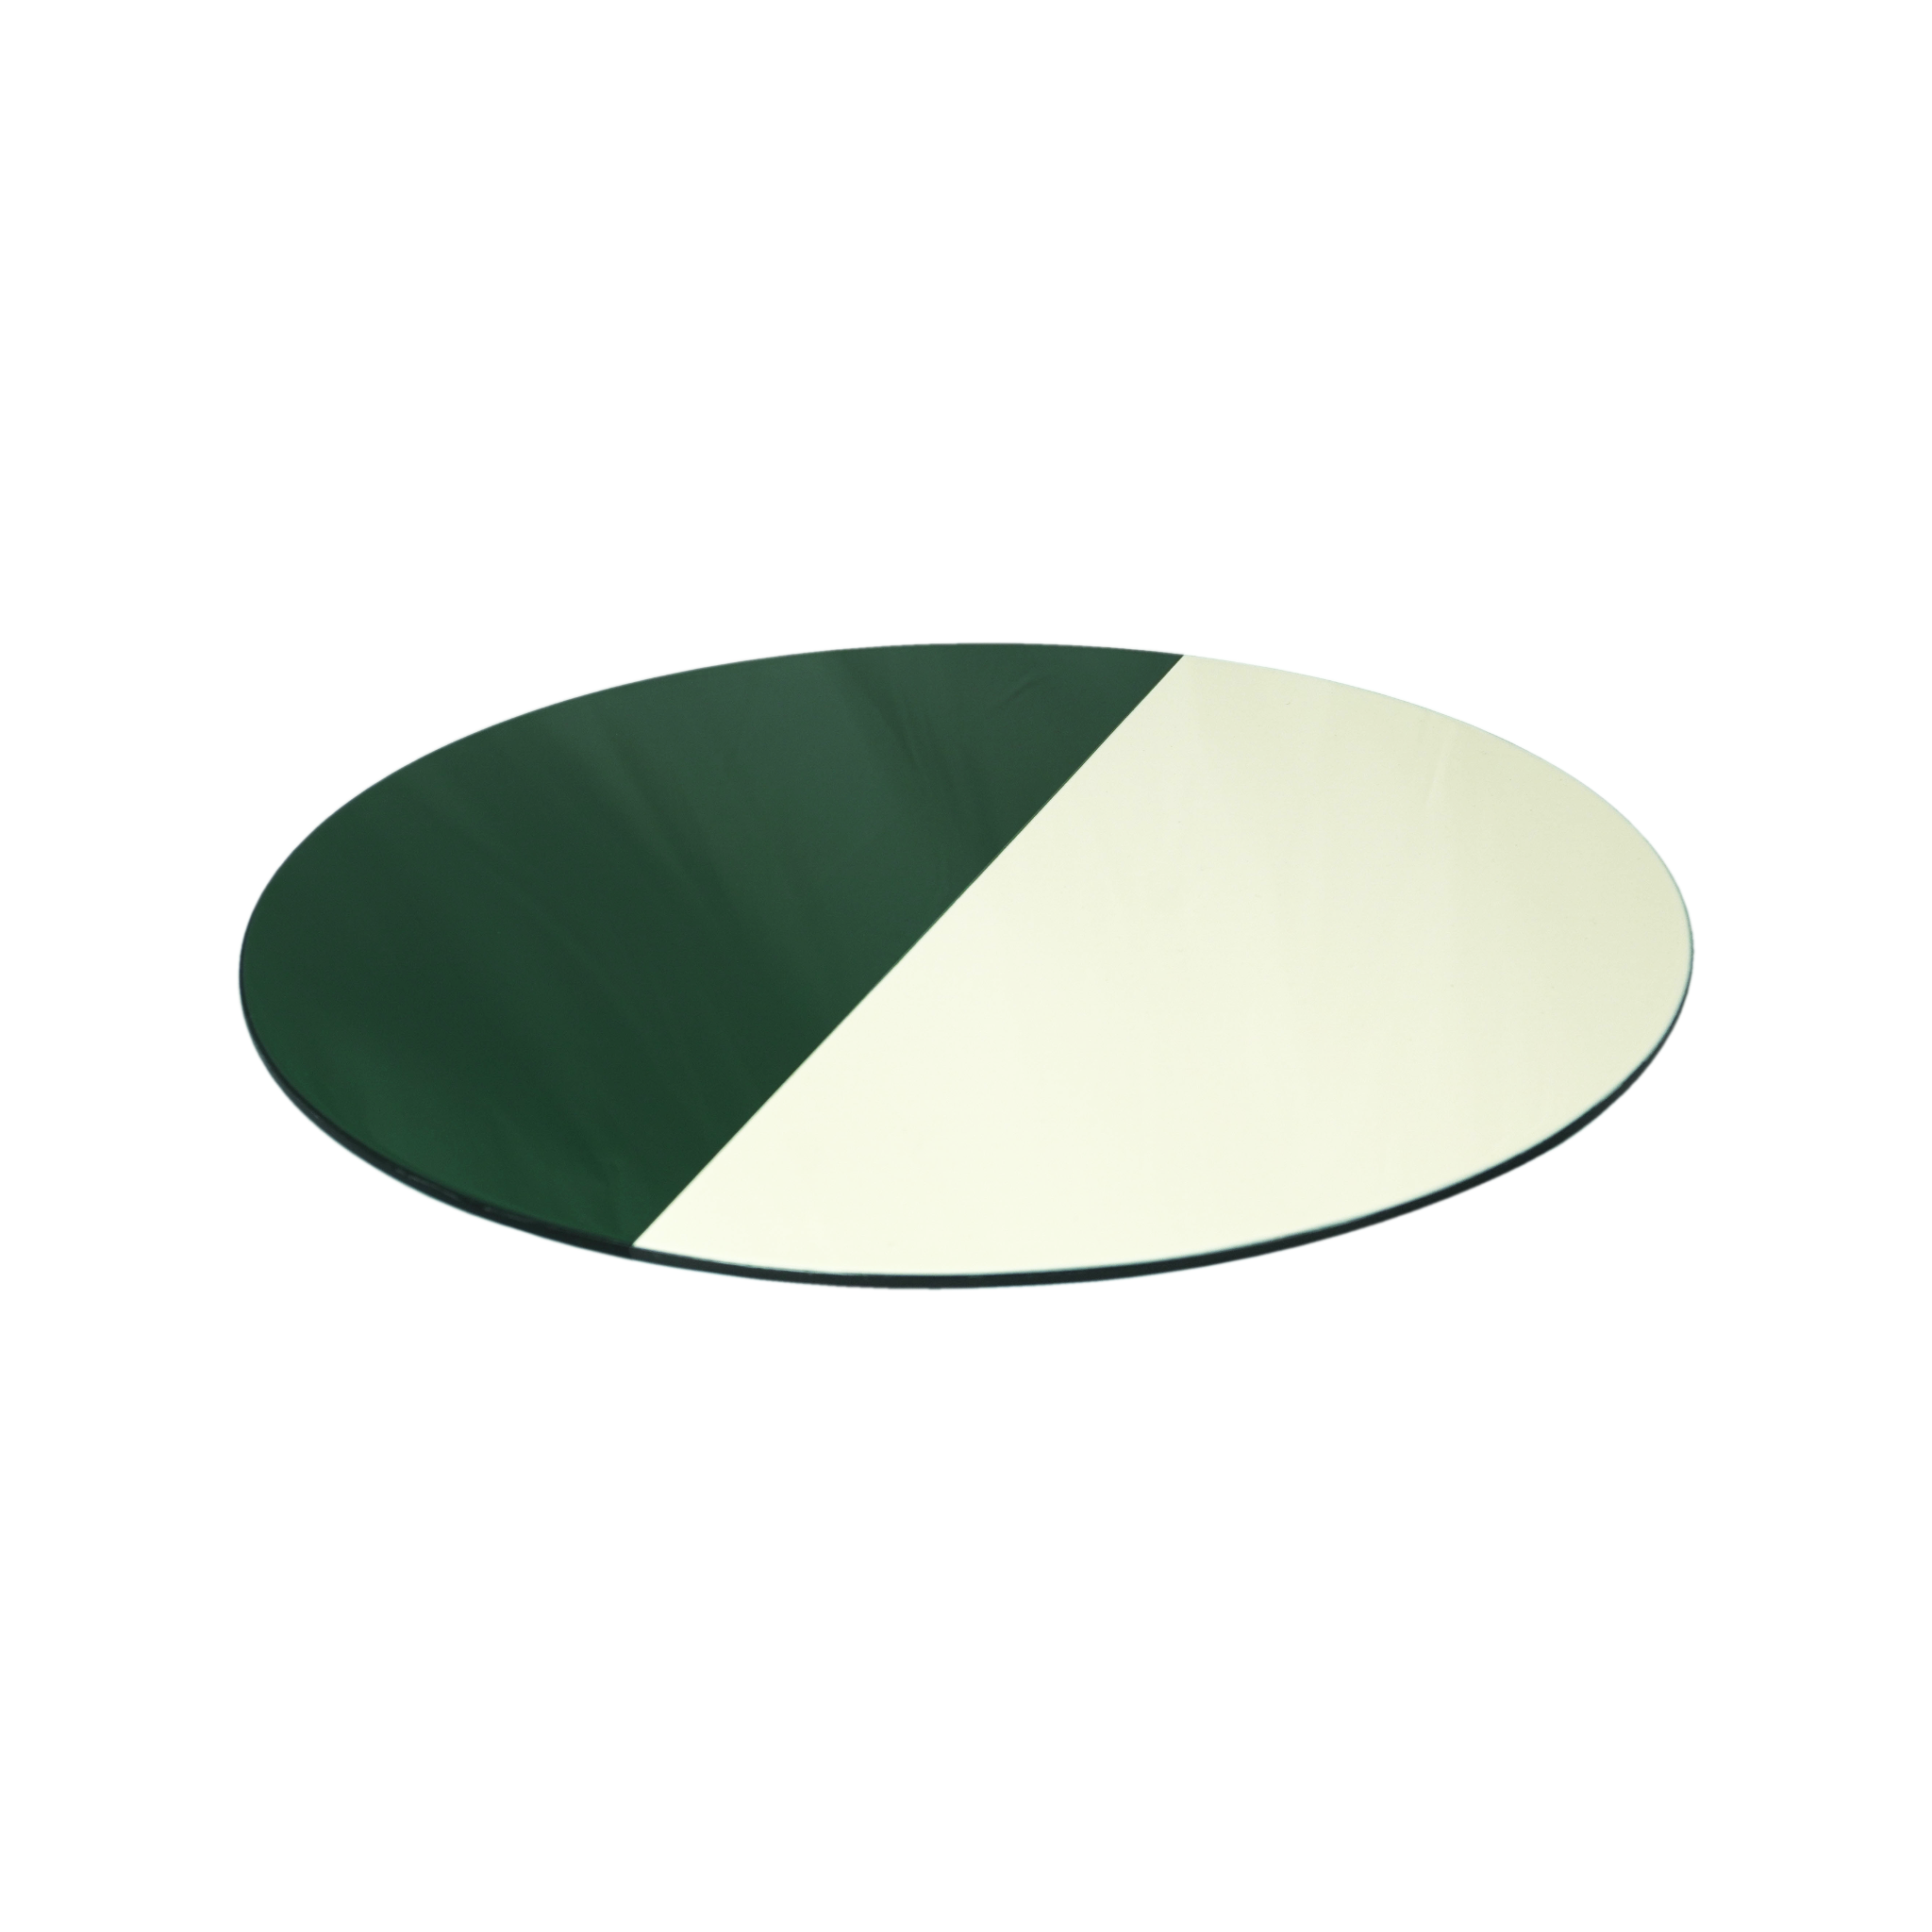  Lacquer Placemat Green & Beige 